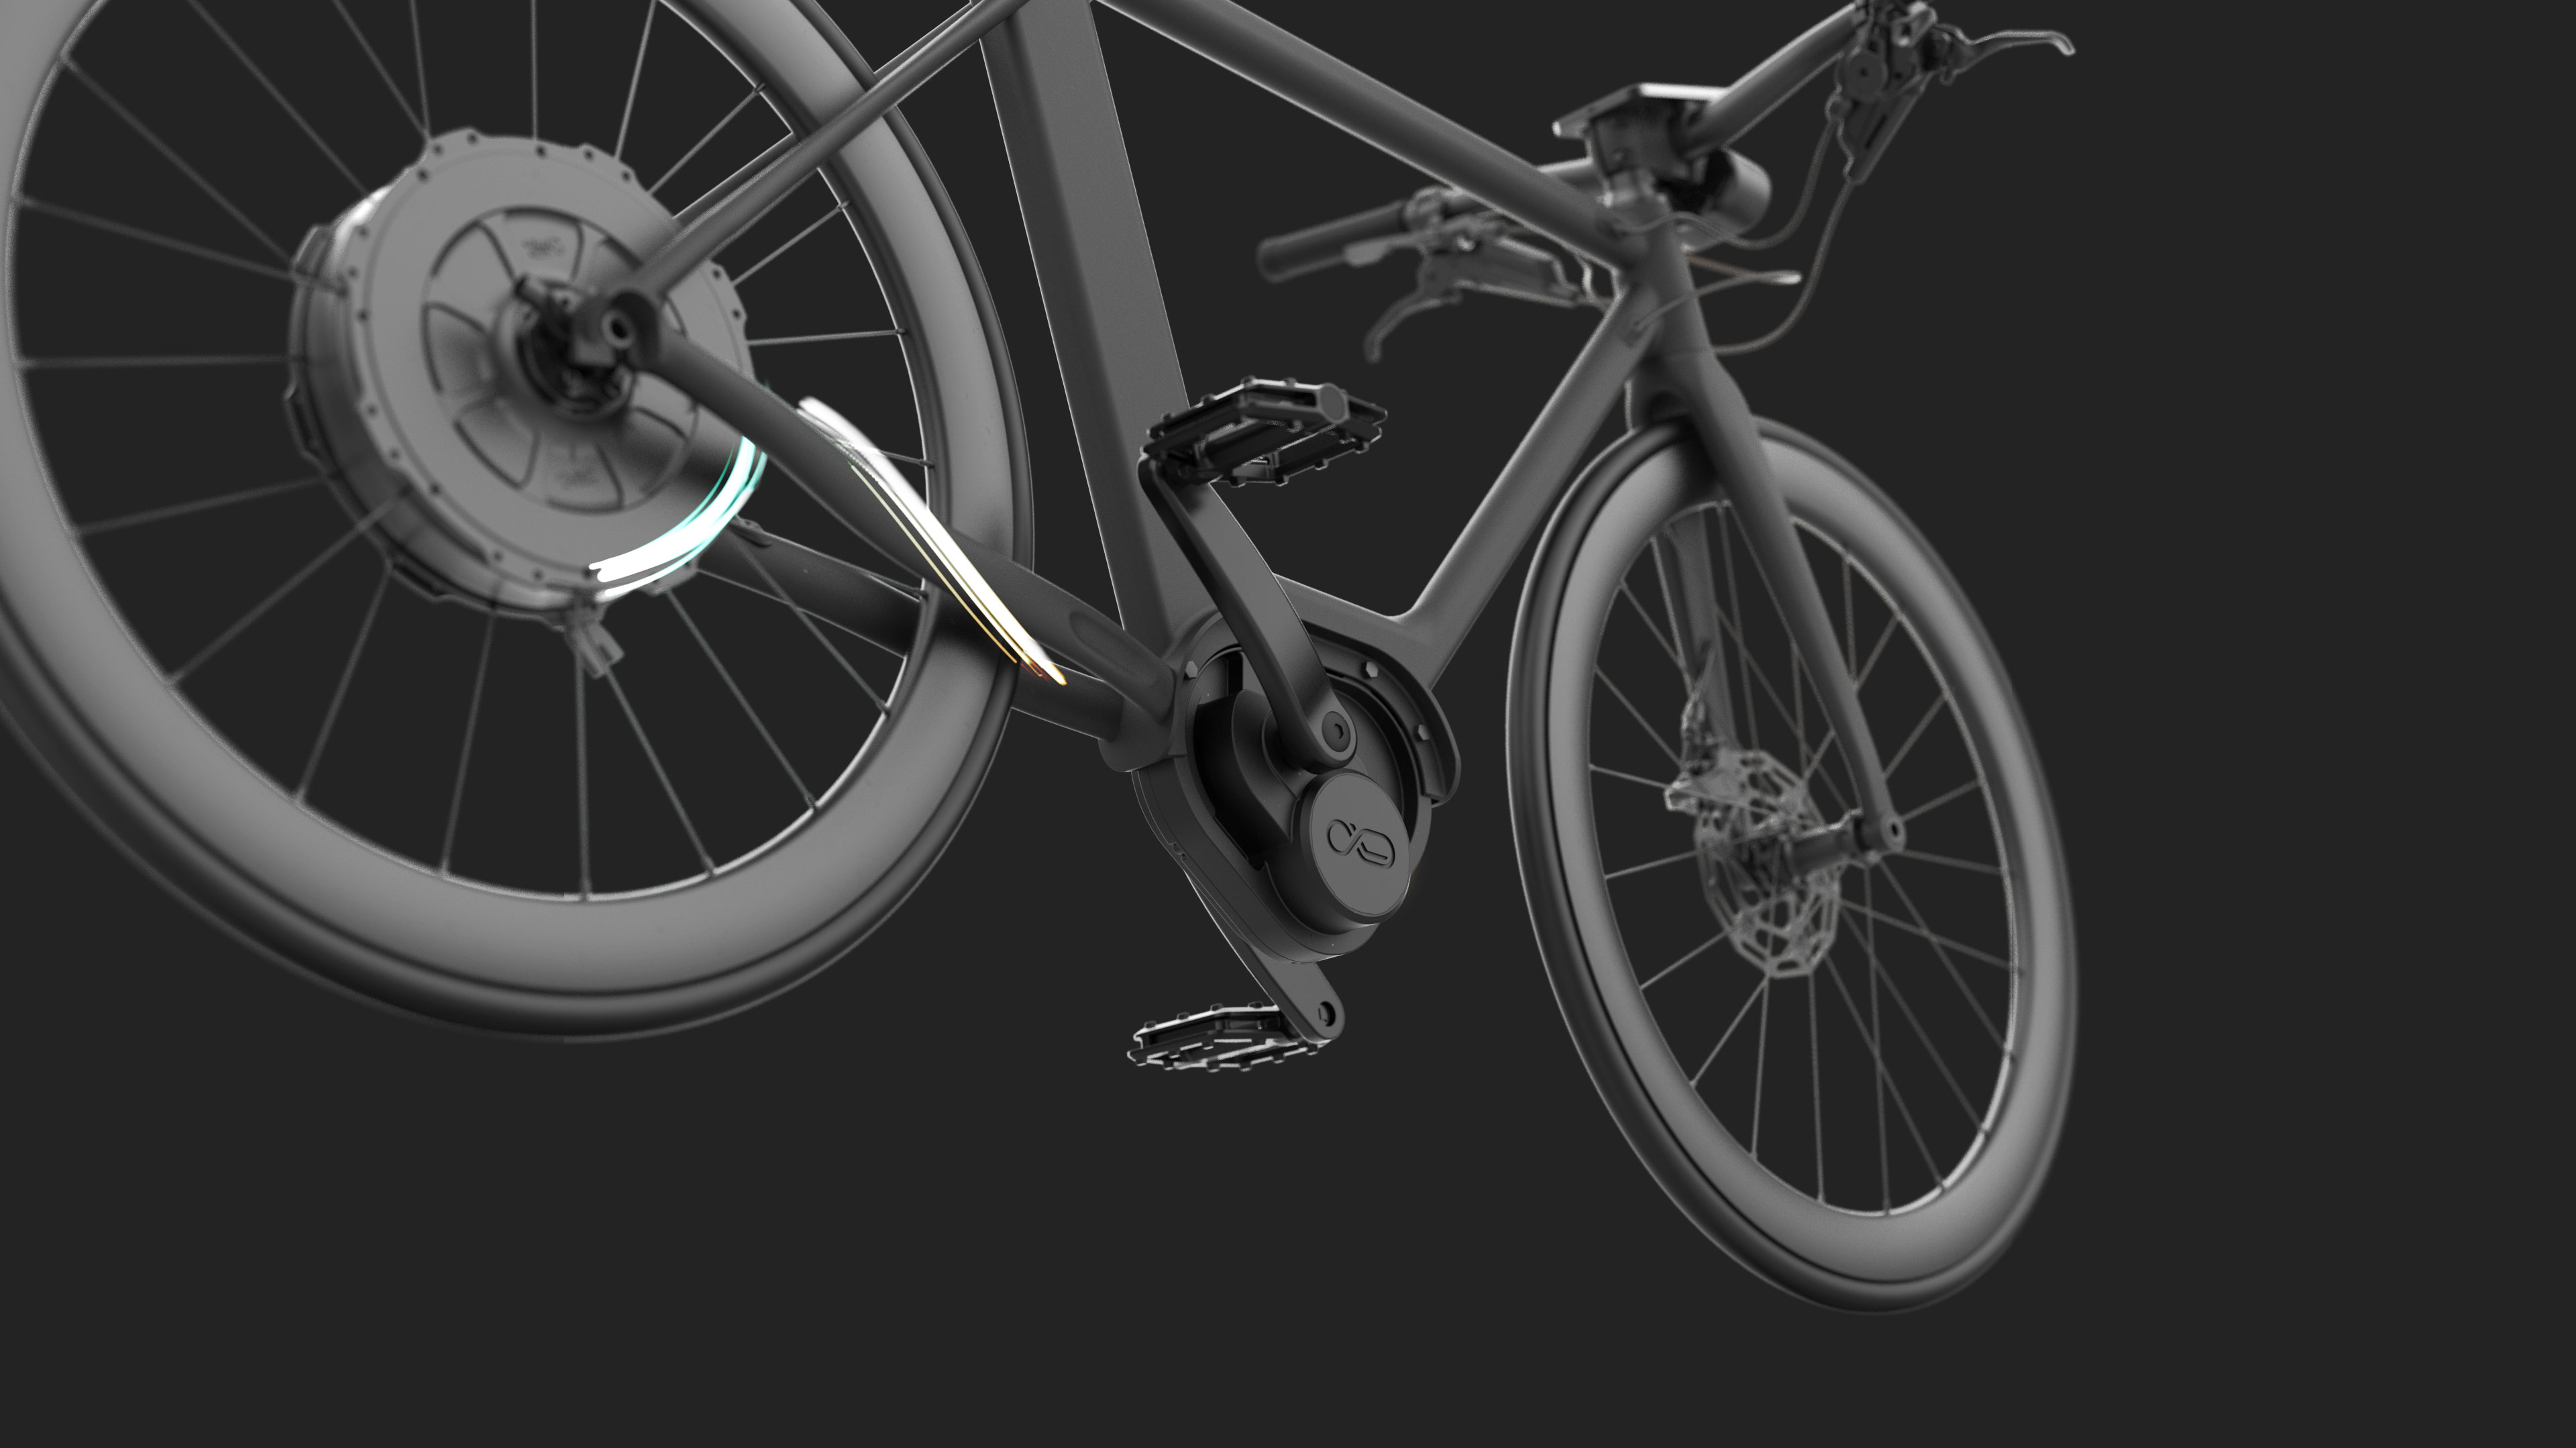 PERS Chainless Pedaling System